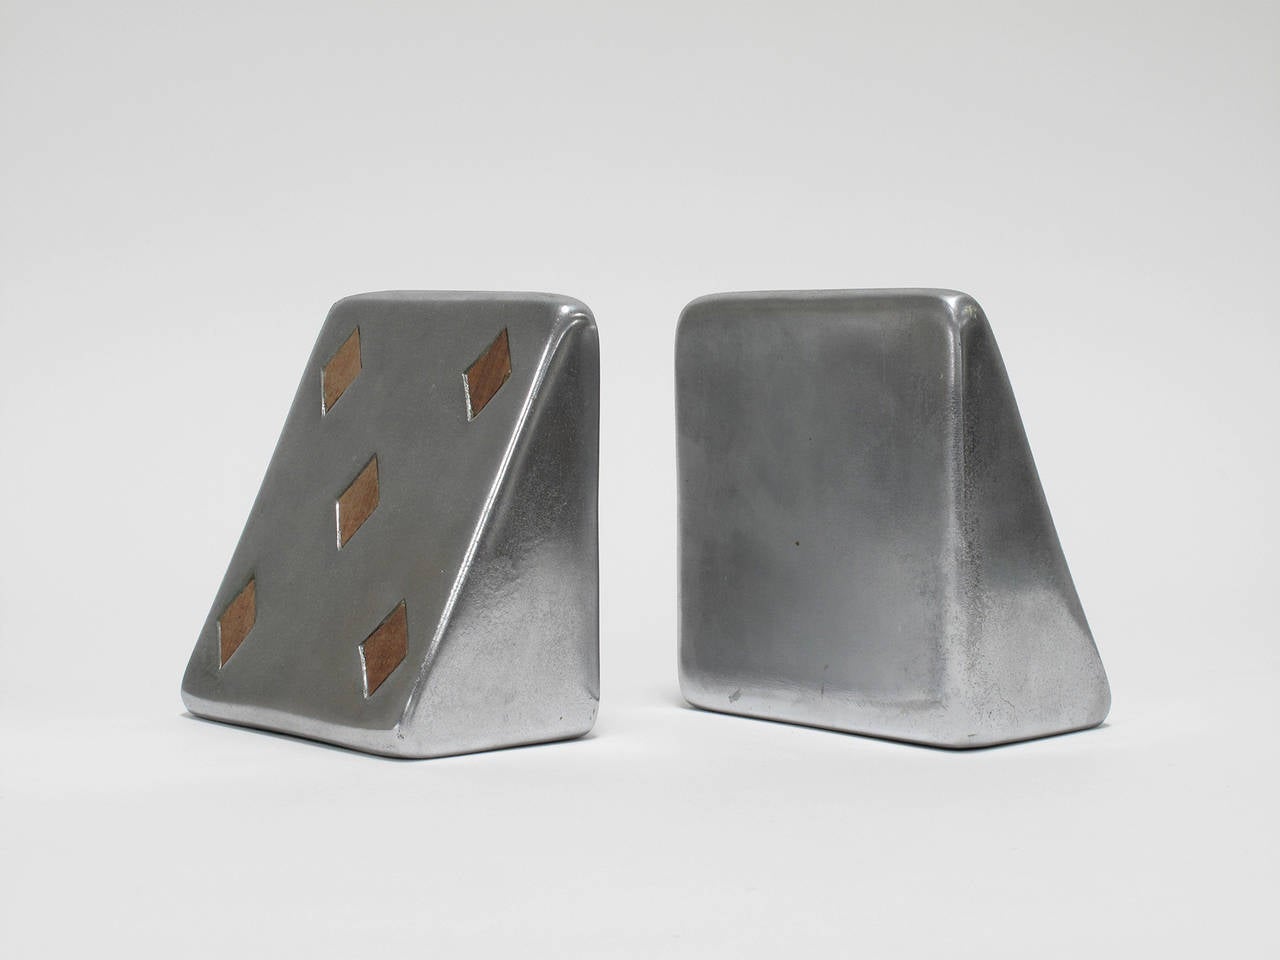 Pair of bookends in silver plated cast metal with inlaid wood diamonds designed by Ben Seibel and made by Jenfred Ware for the "Maison Gourmet" collection, New York, 1950s.